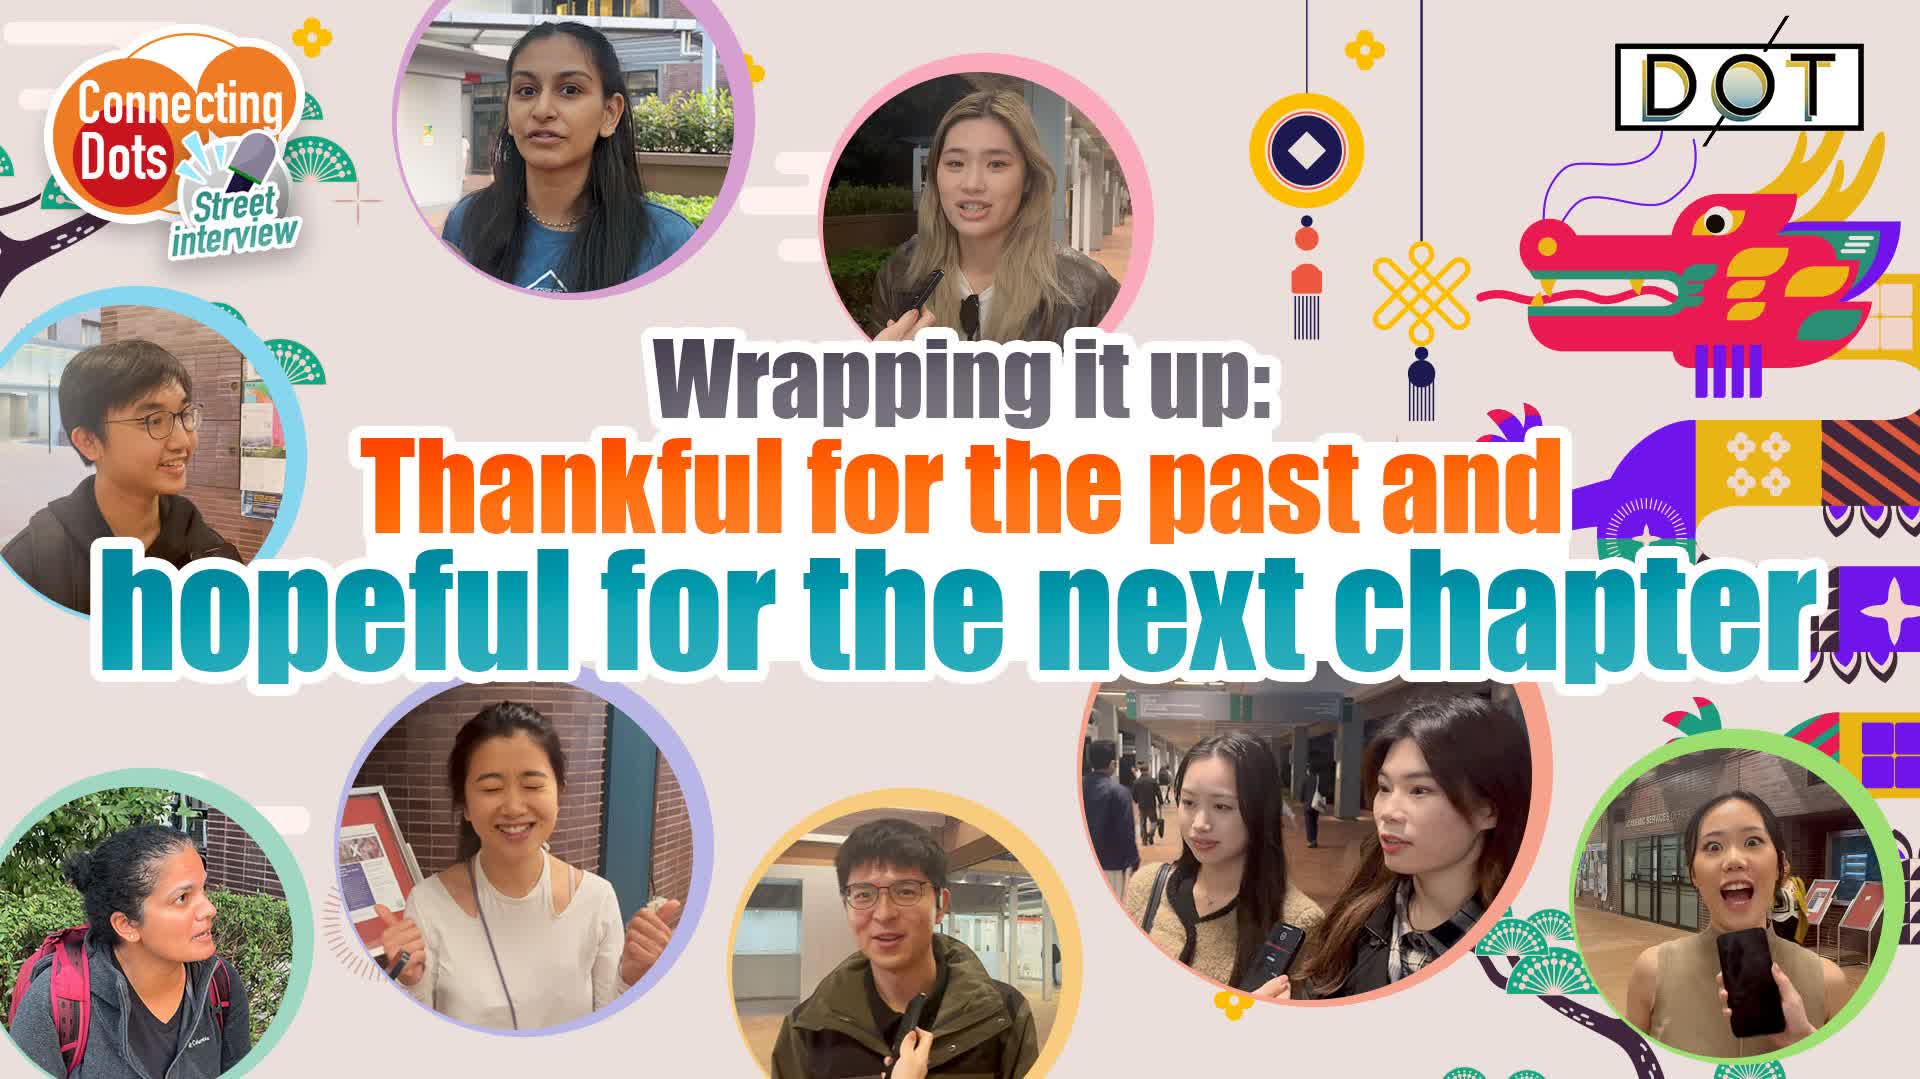 Connecting Dots | Wrapping it up: Thankful for the past and hopeful for the next chapter ahead!